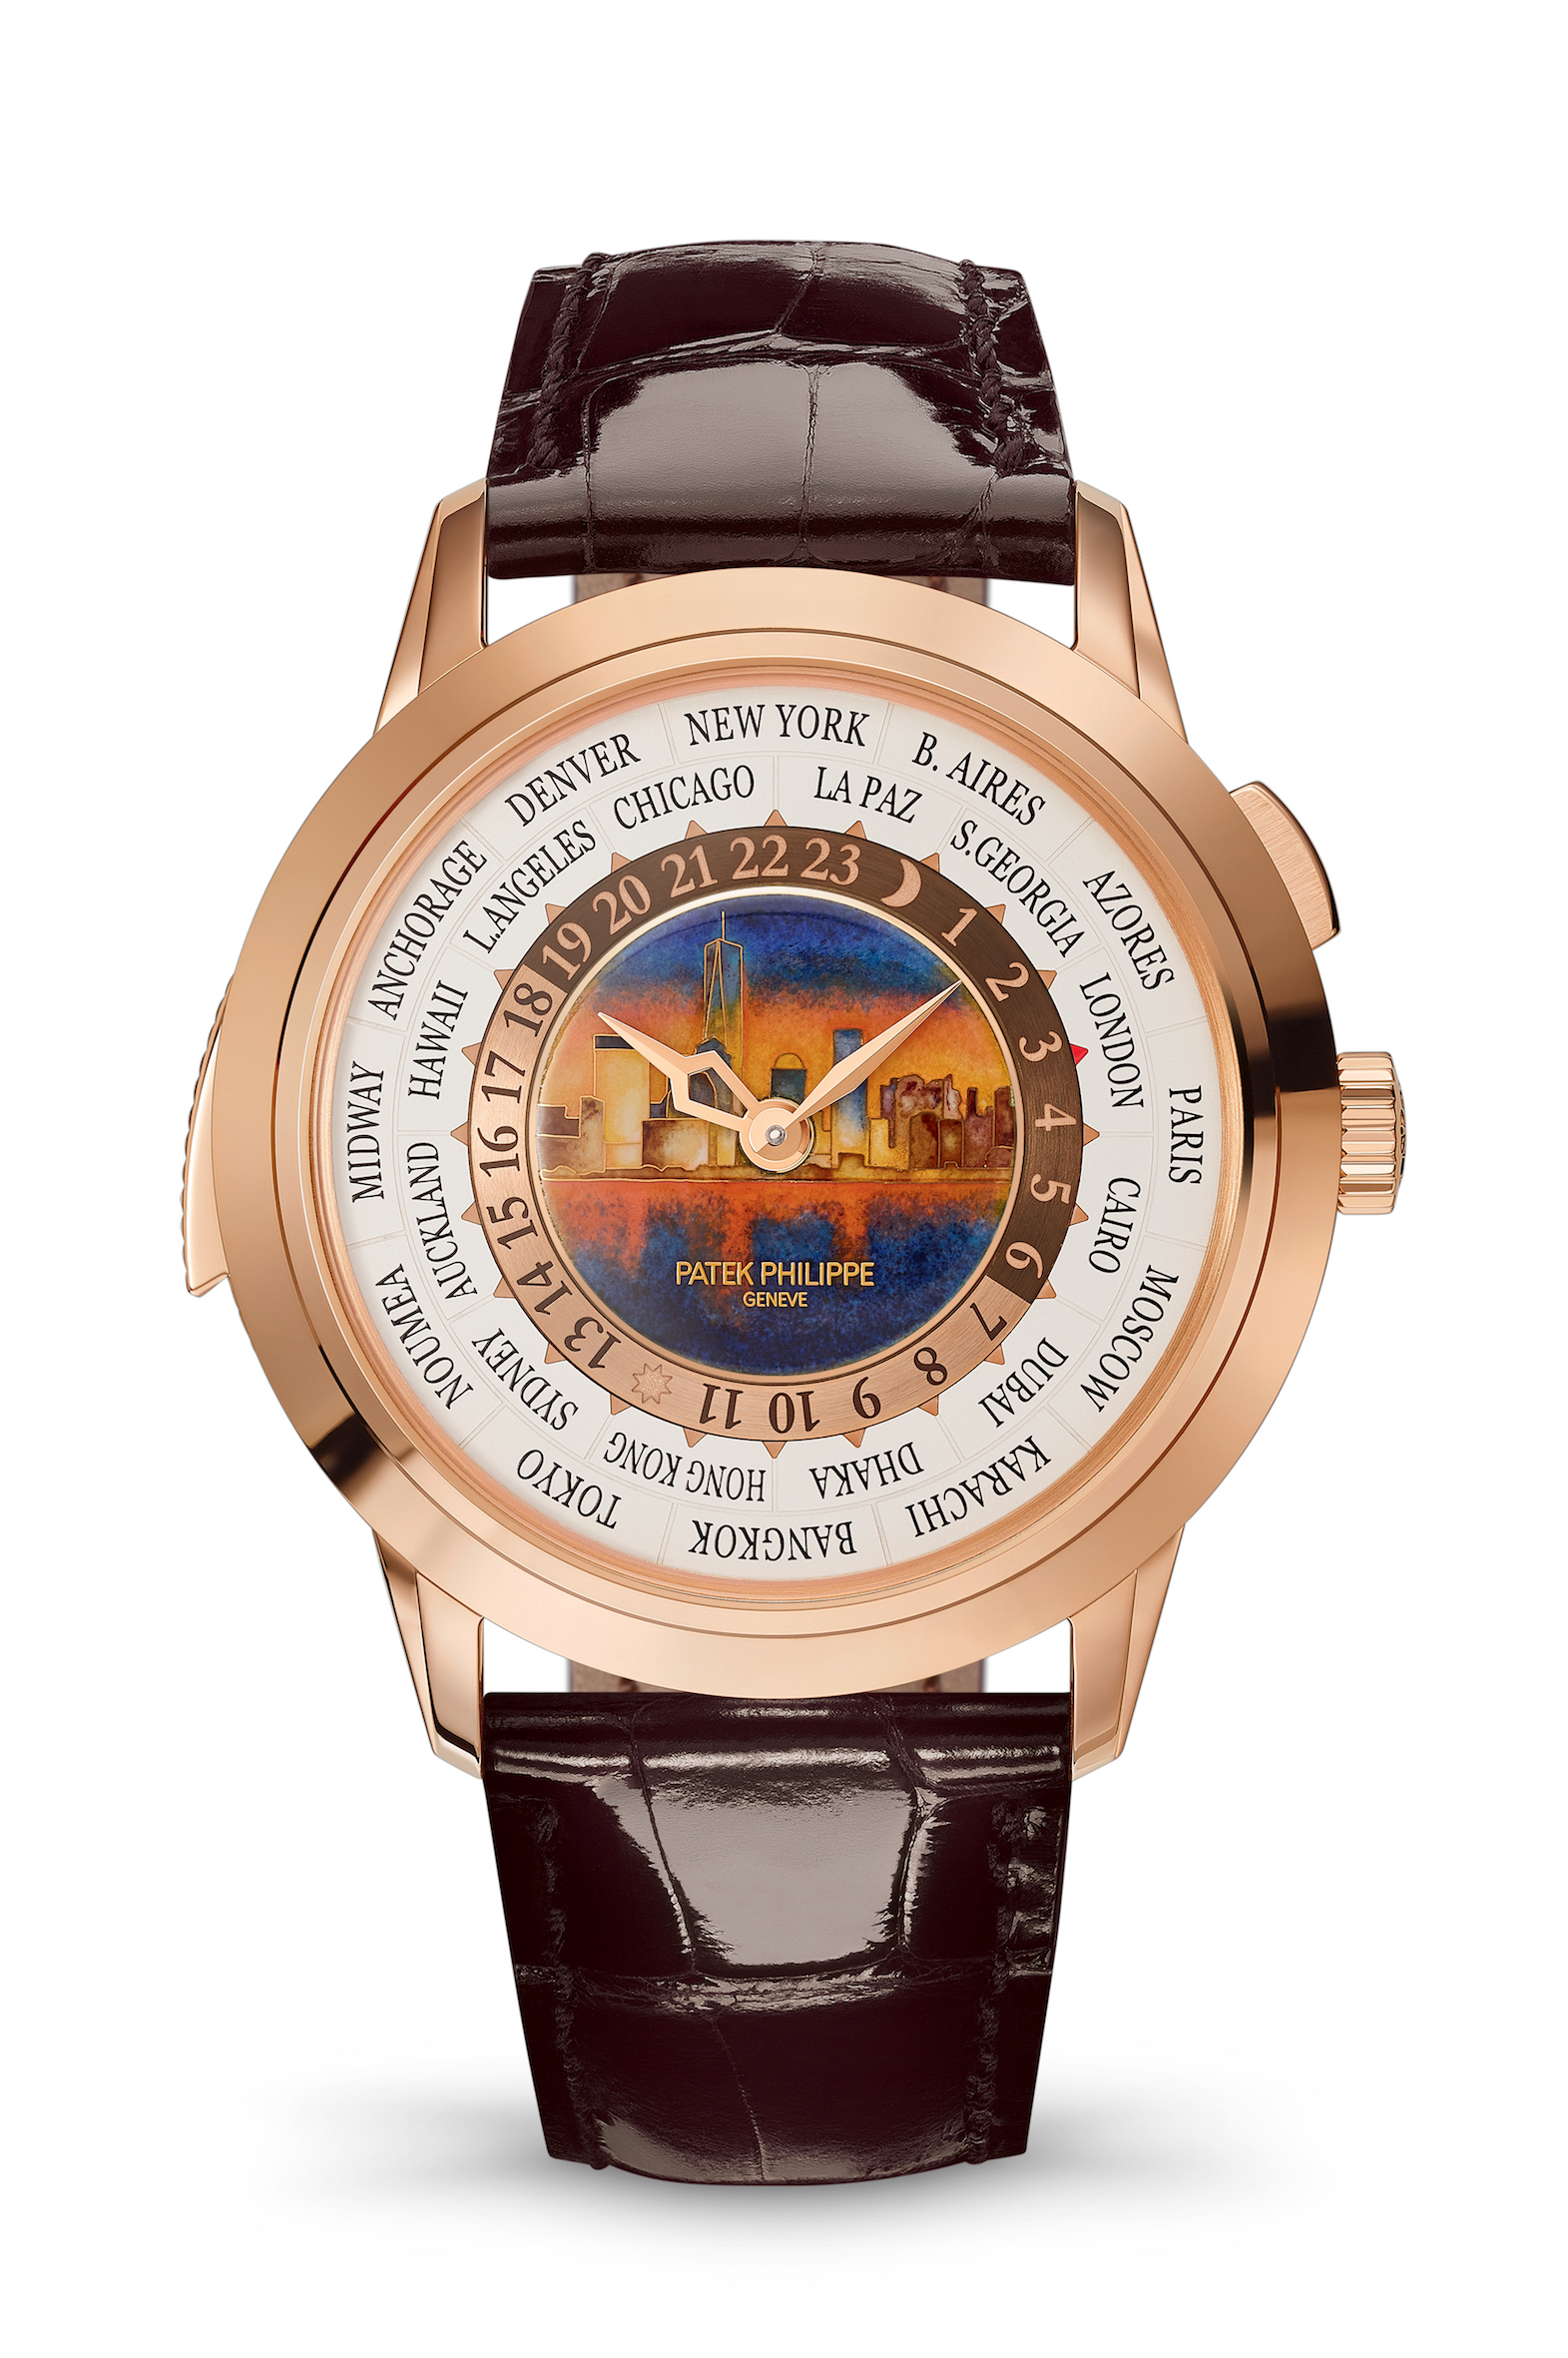 Patek Philippe World Time Minute Repeater Ref. 5531 New York 2017 Special Edition